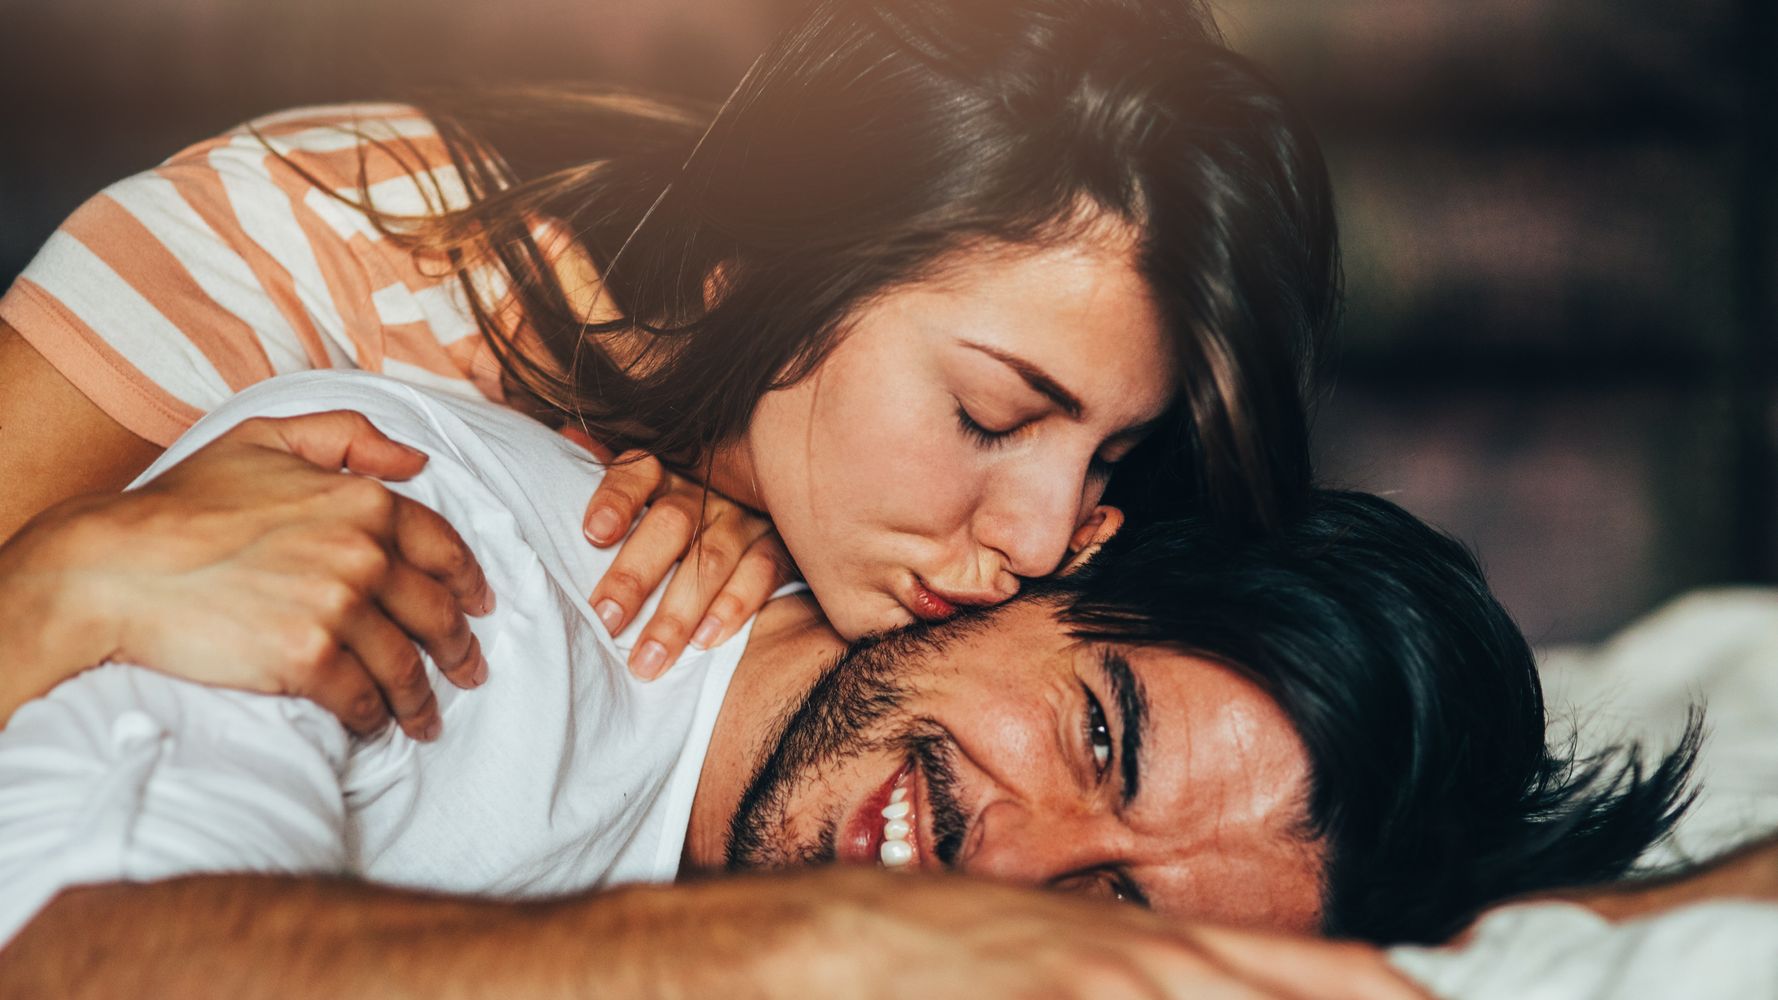 9 Things The Happiest Couples Do For Each Other Without Being Asked